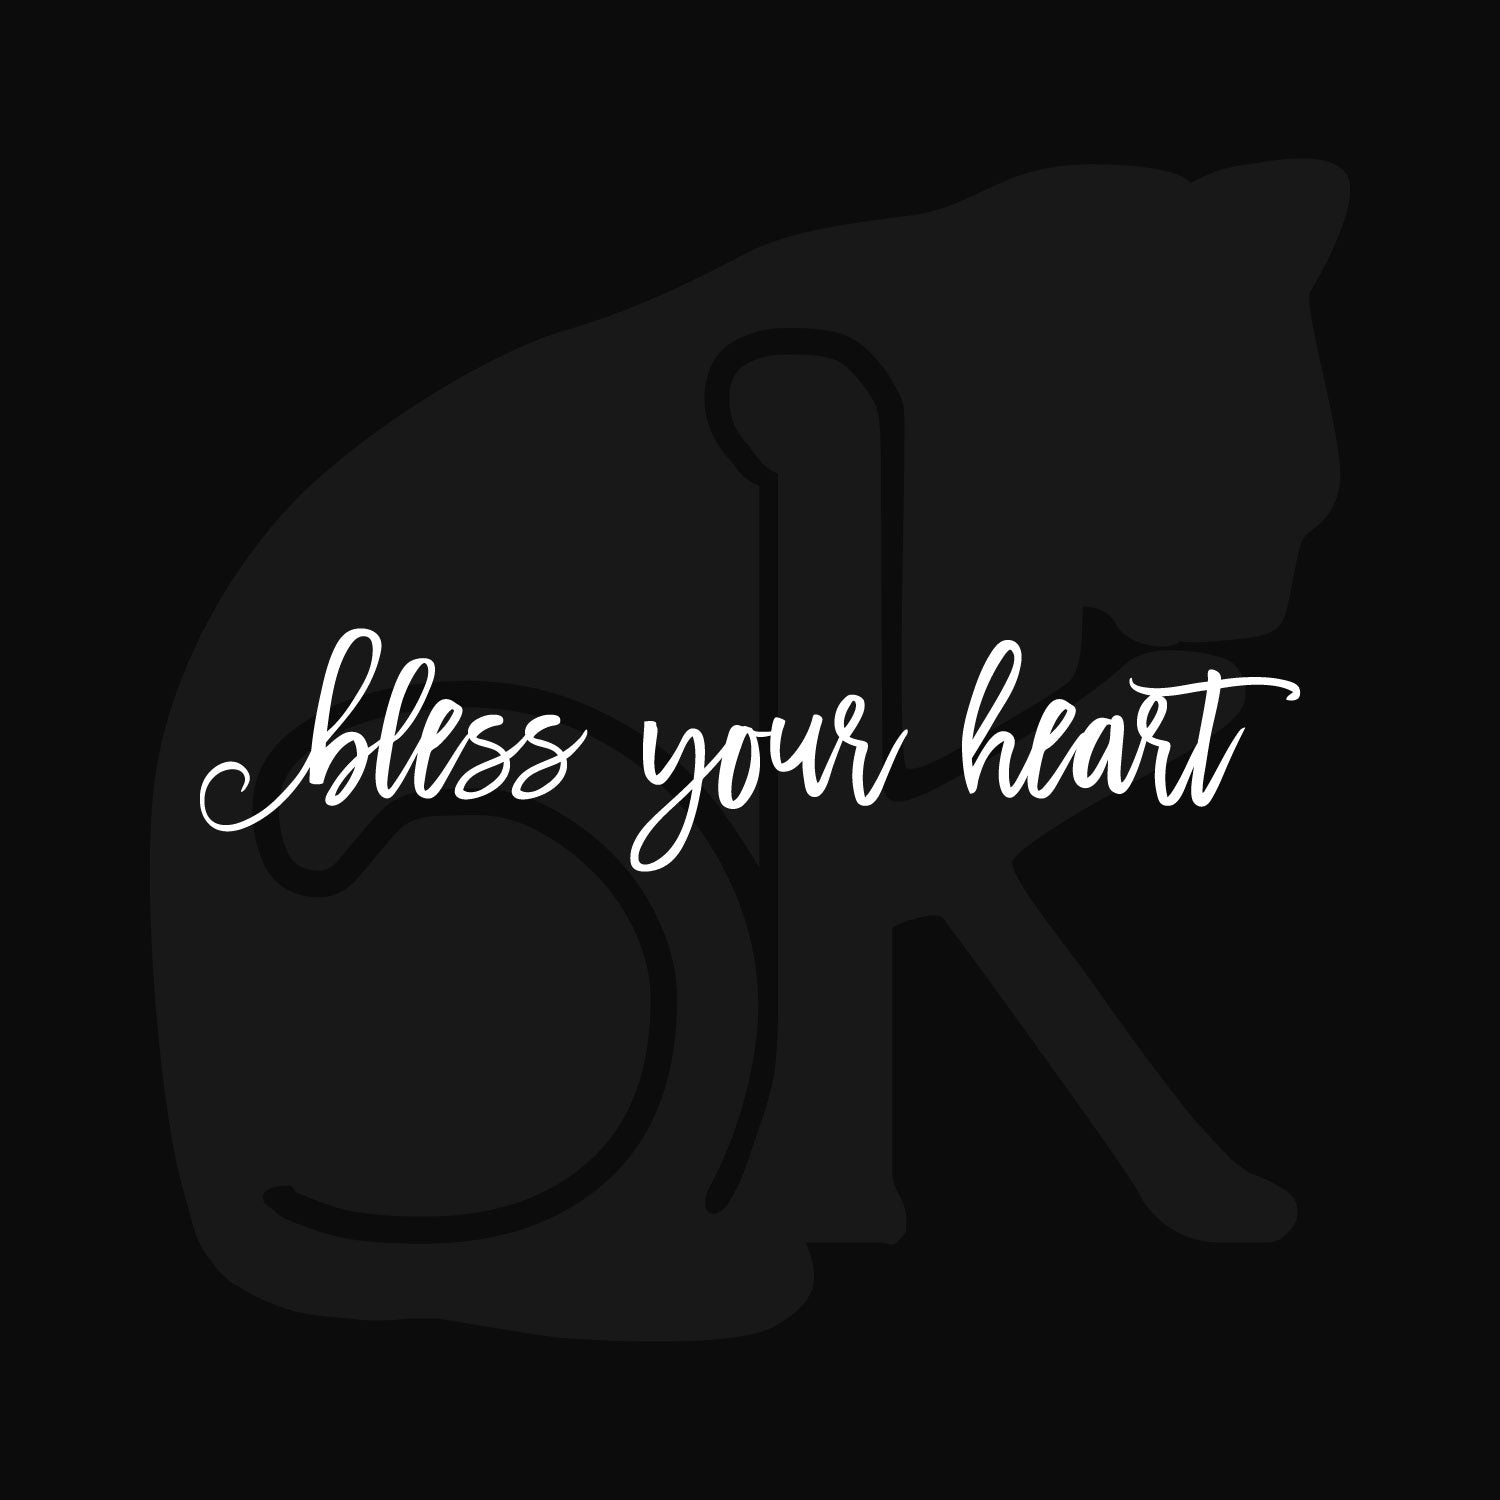 Standalone watermarked white graphic in an excessively twee font: "bless your heart"